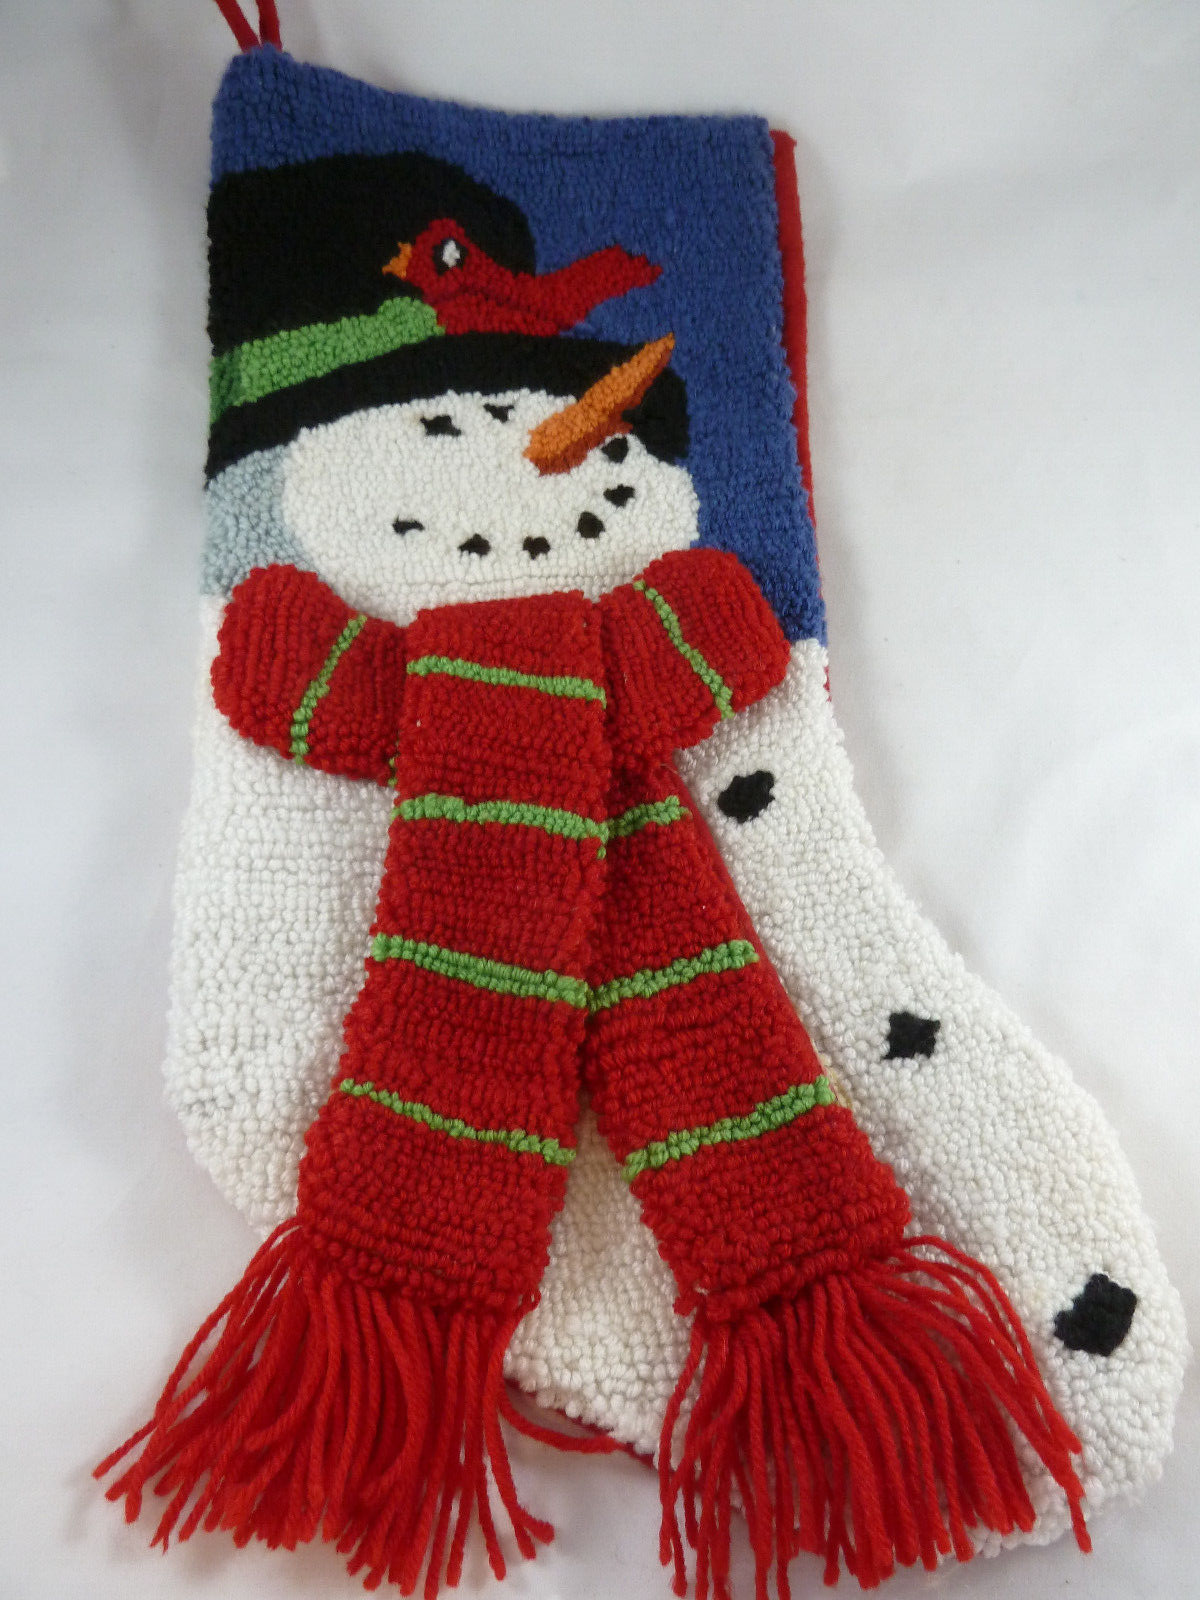 Primary image for Christmas Stocking Hooked RugS nowman W/Bird & Scarf Design 18" long